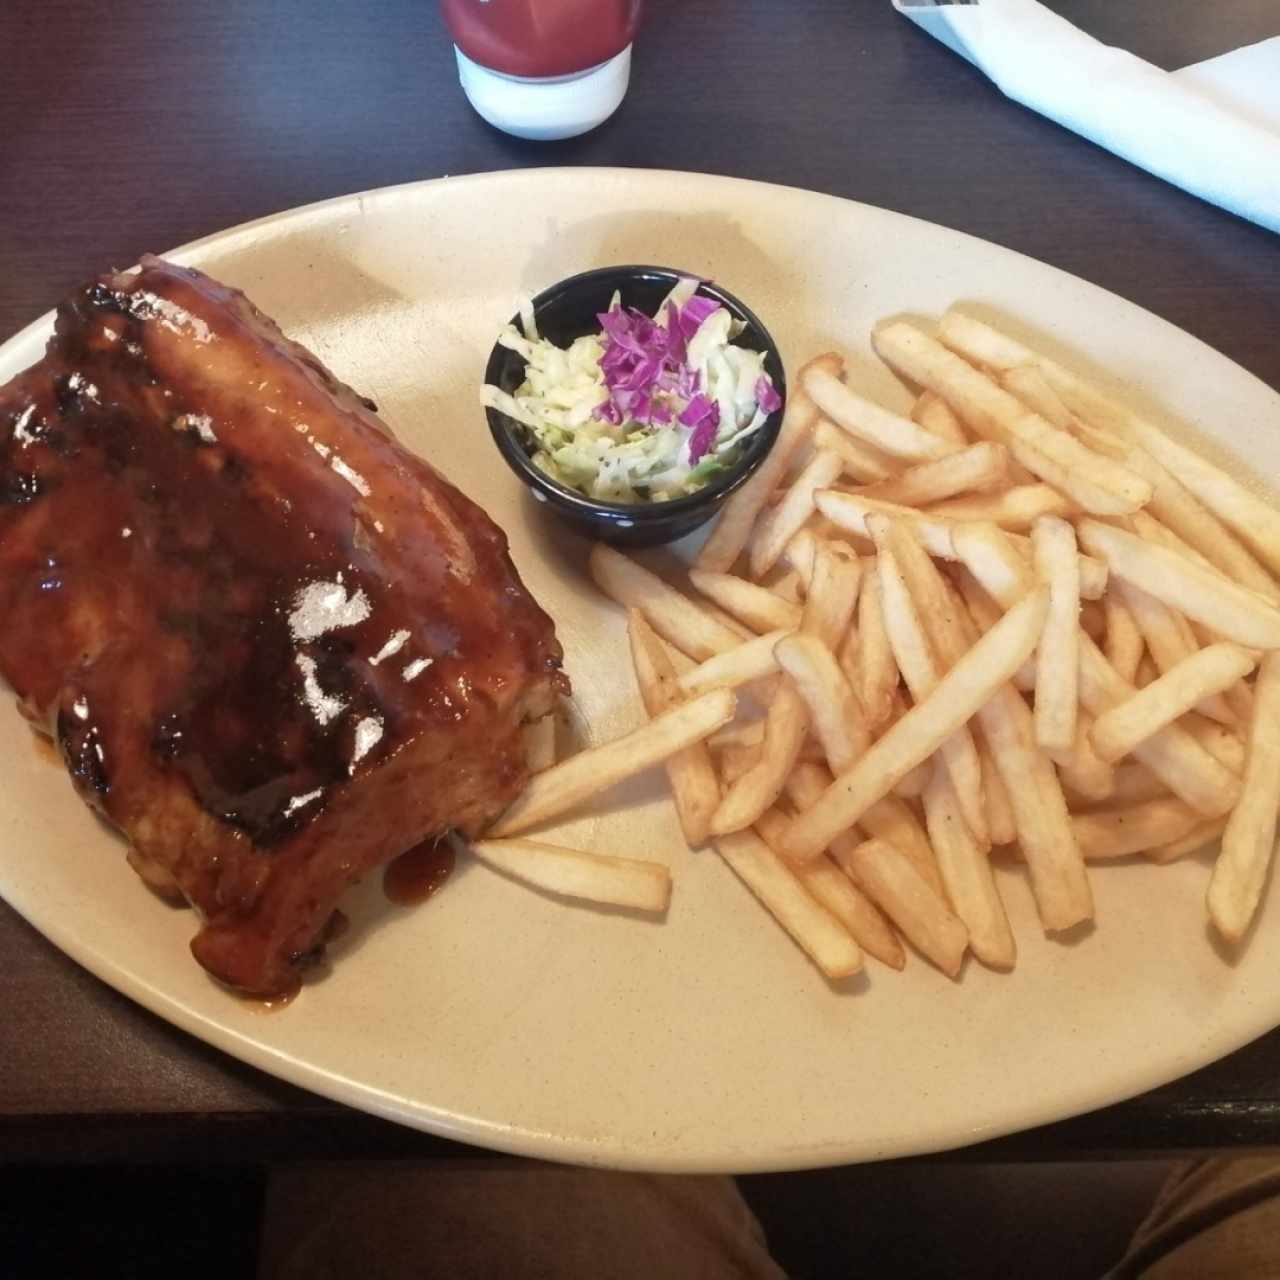 The Original Baby Pack Ribs